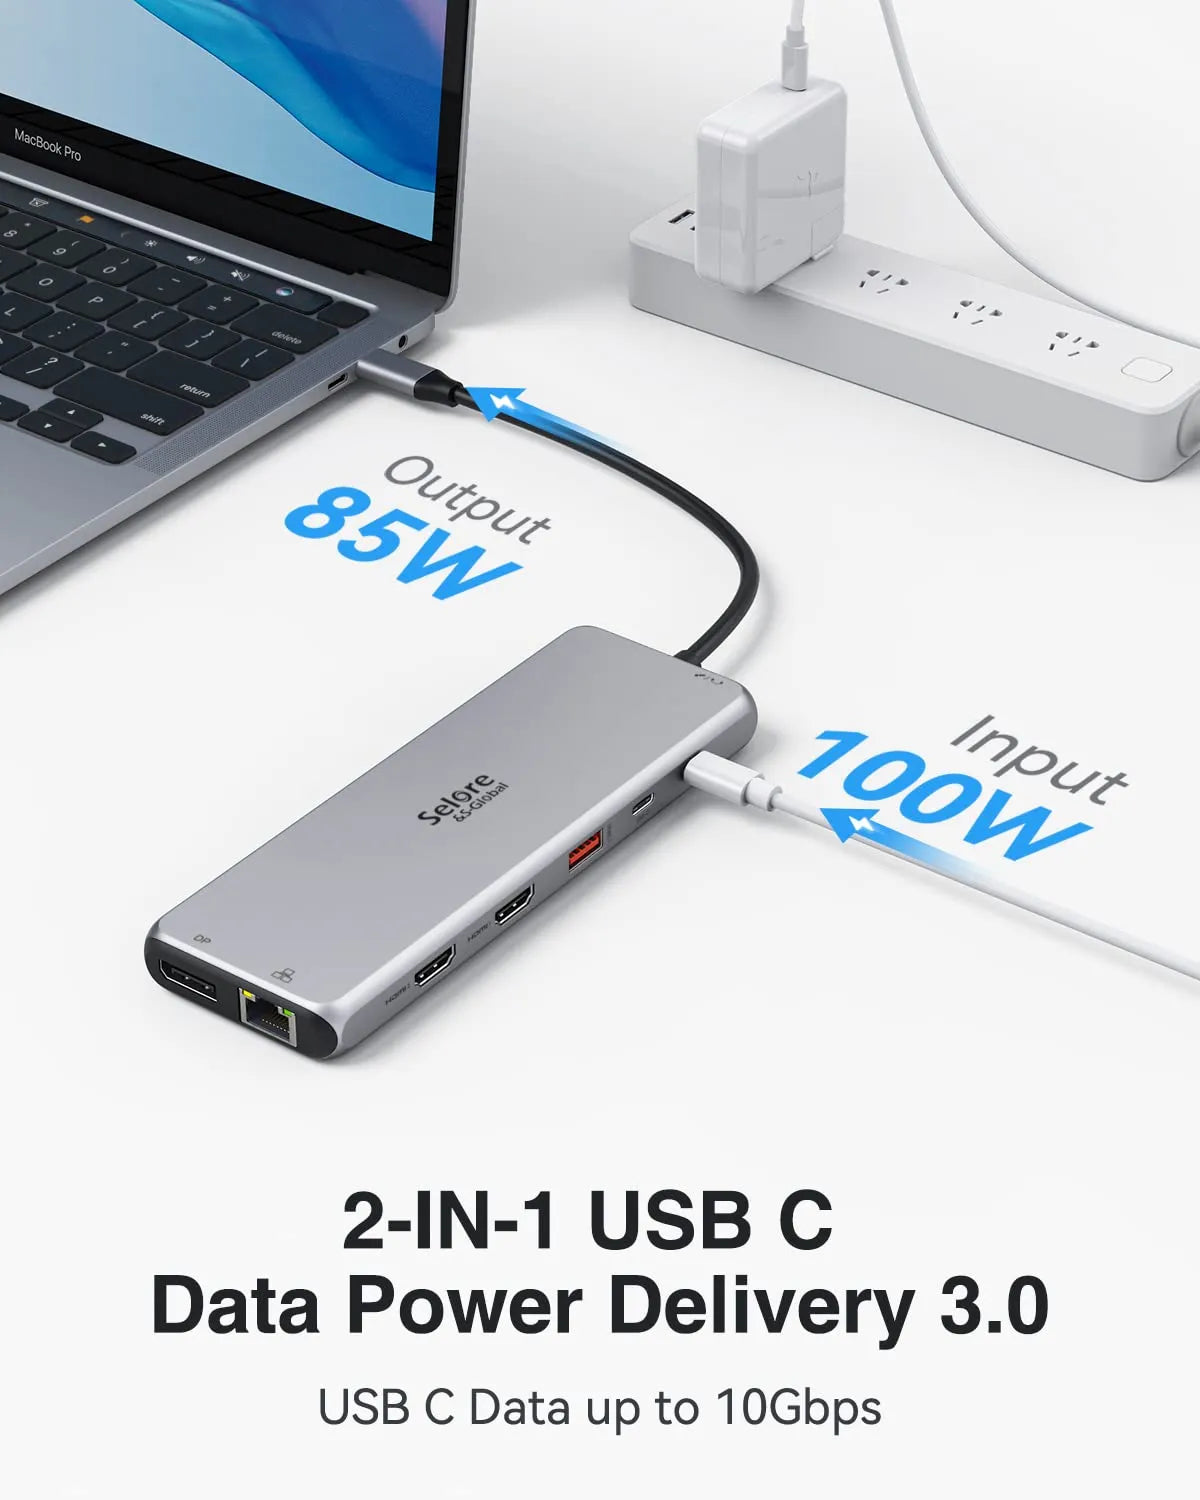 UGREEN USB C to Ethernet Adapter, 4 in 1 USB C Hub Ethernet with 3 USB 3.0  Ports/Gigabit Rj45, Plug & Play, Thunderbolt (3/4) to Network Adapter for